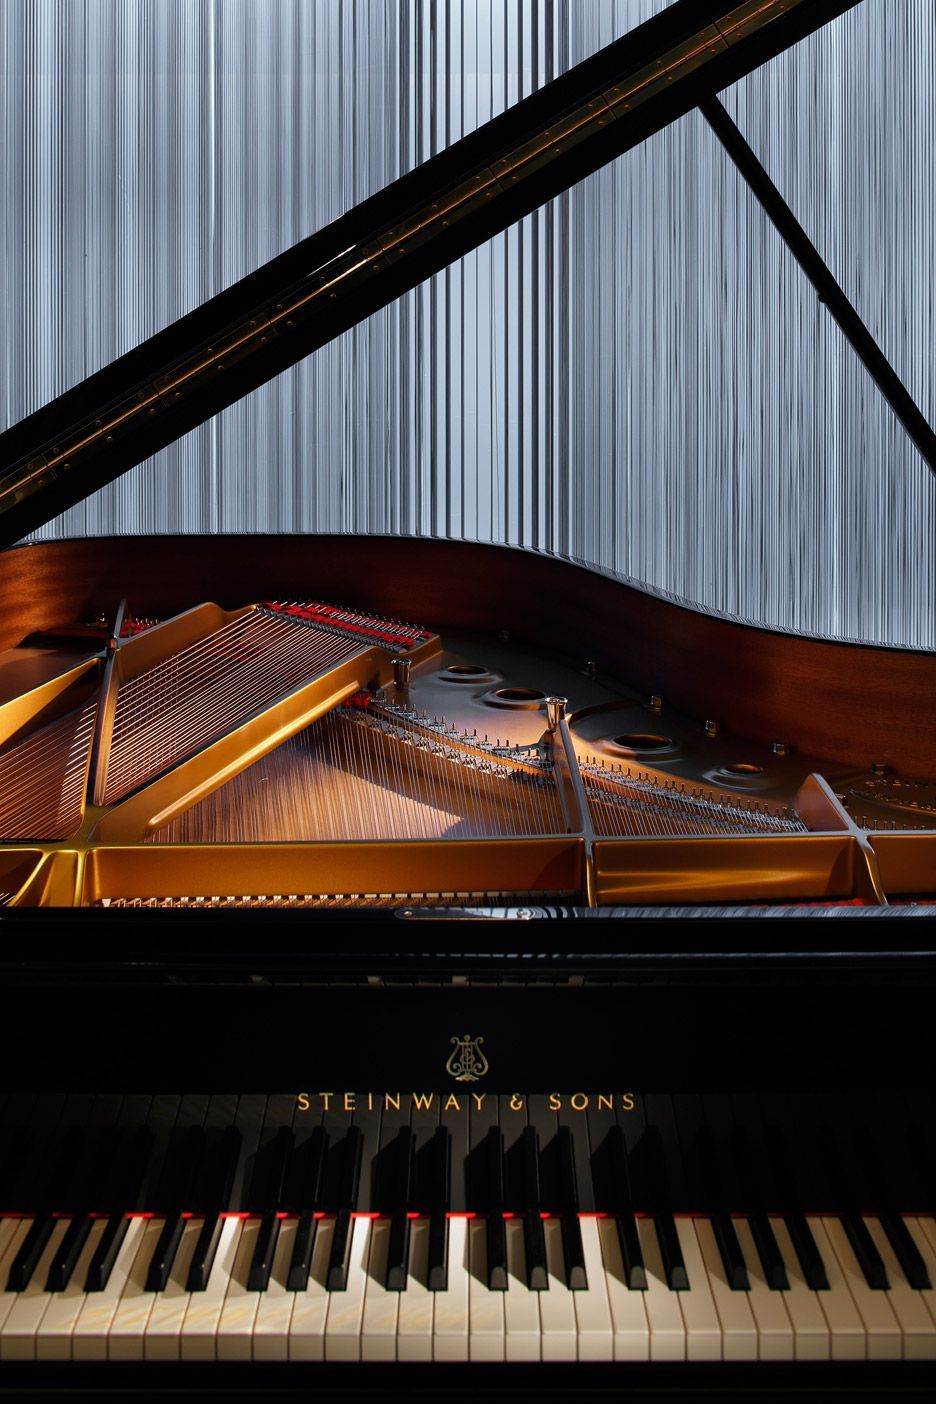 The design of the Steinway & Sons showroom in Tokyo is intended to